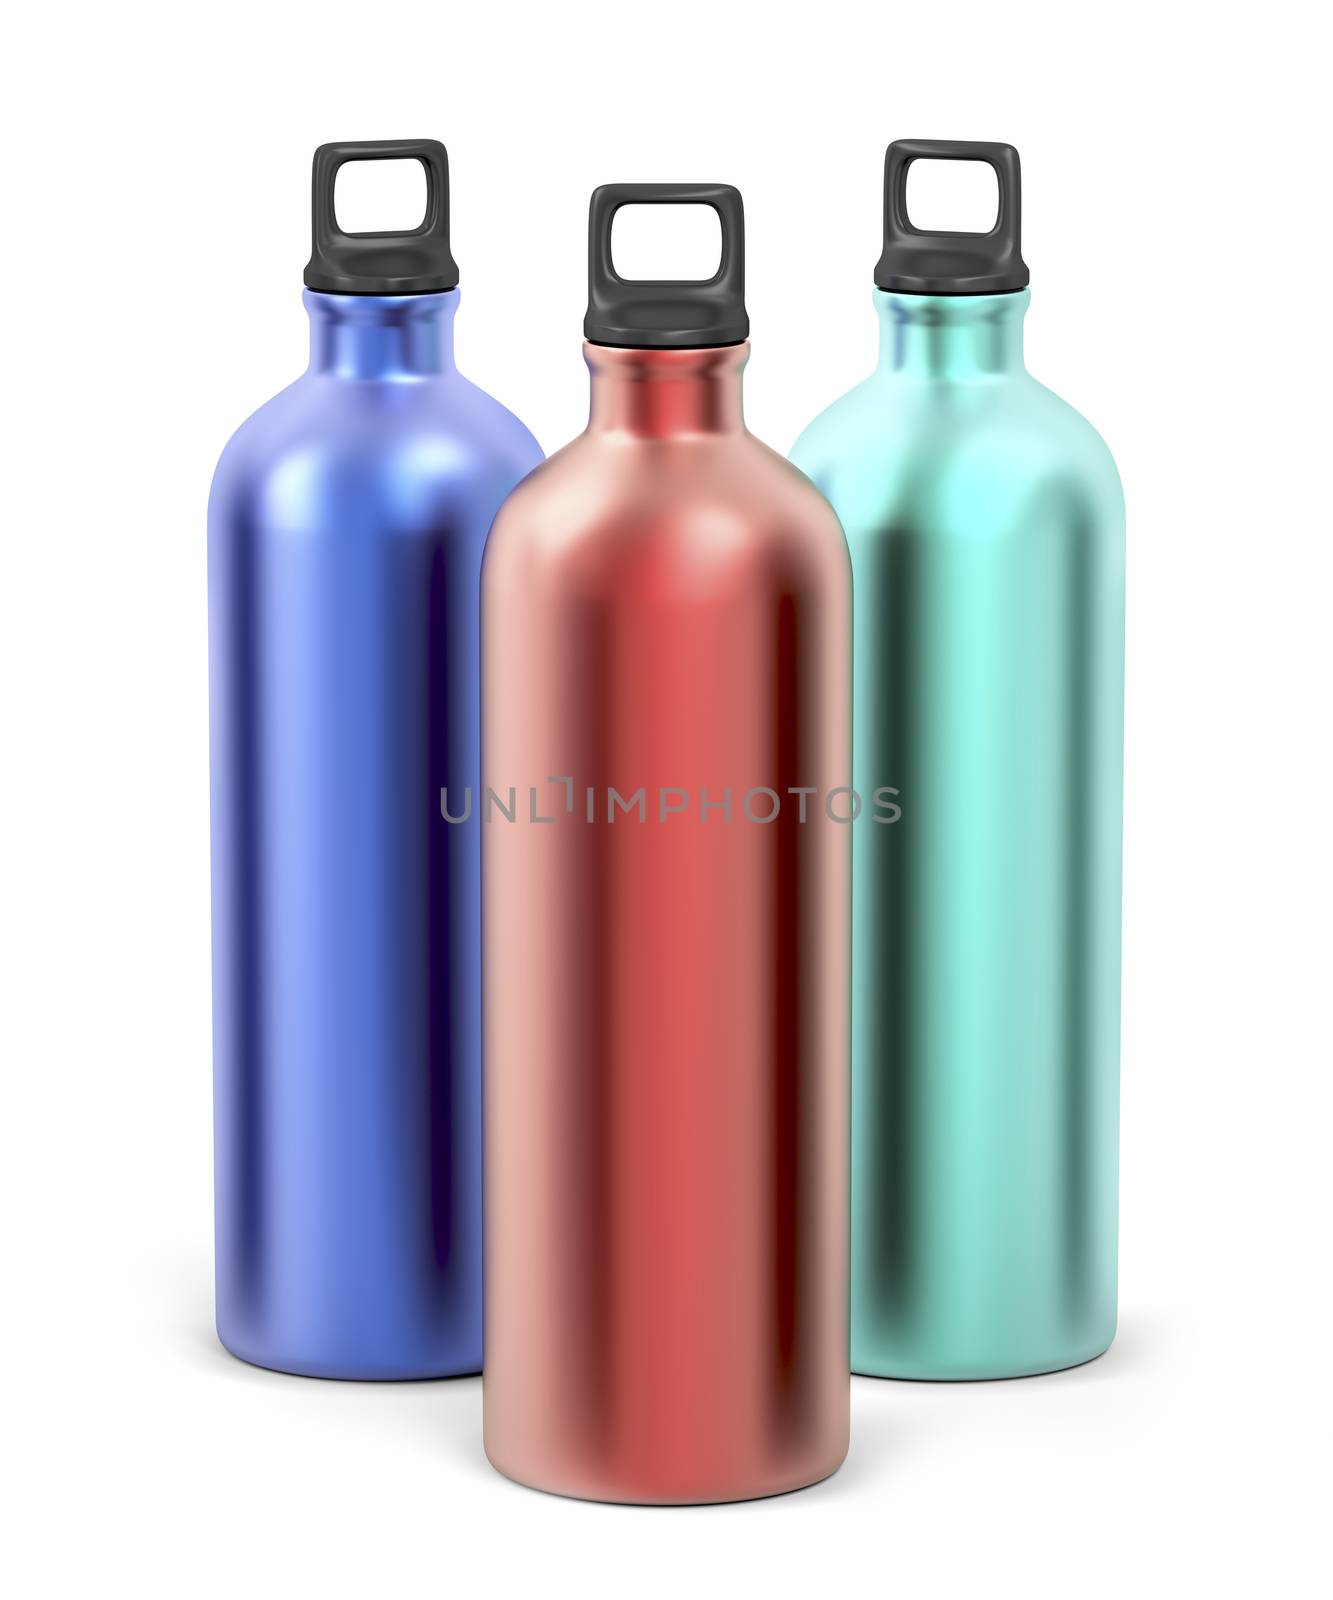 Aluminum sport bottles by magraphics